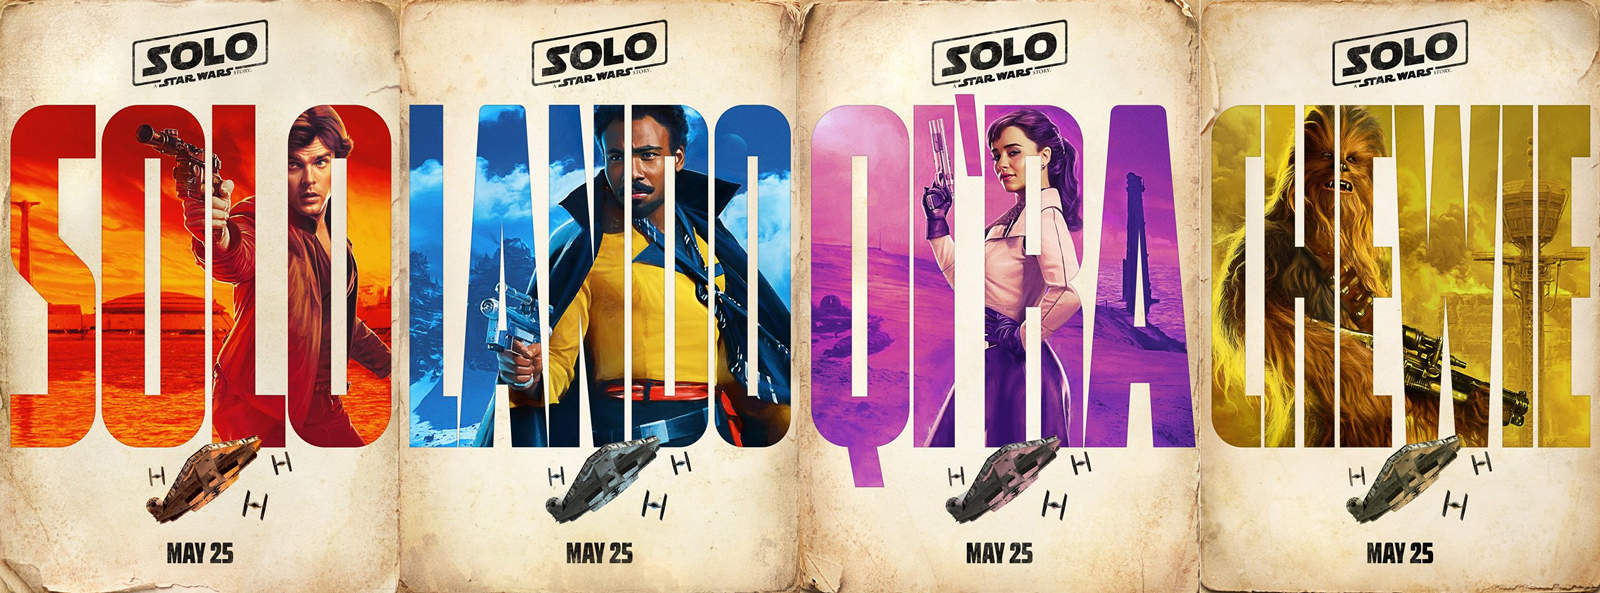 Solo posters 1